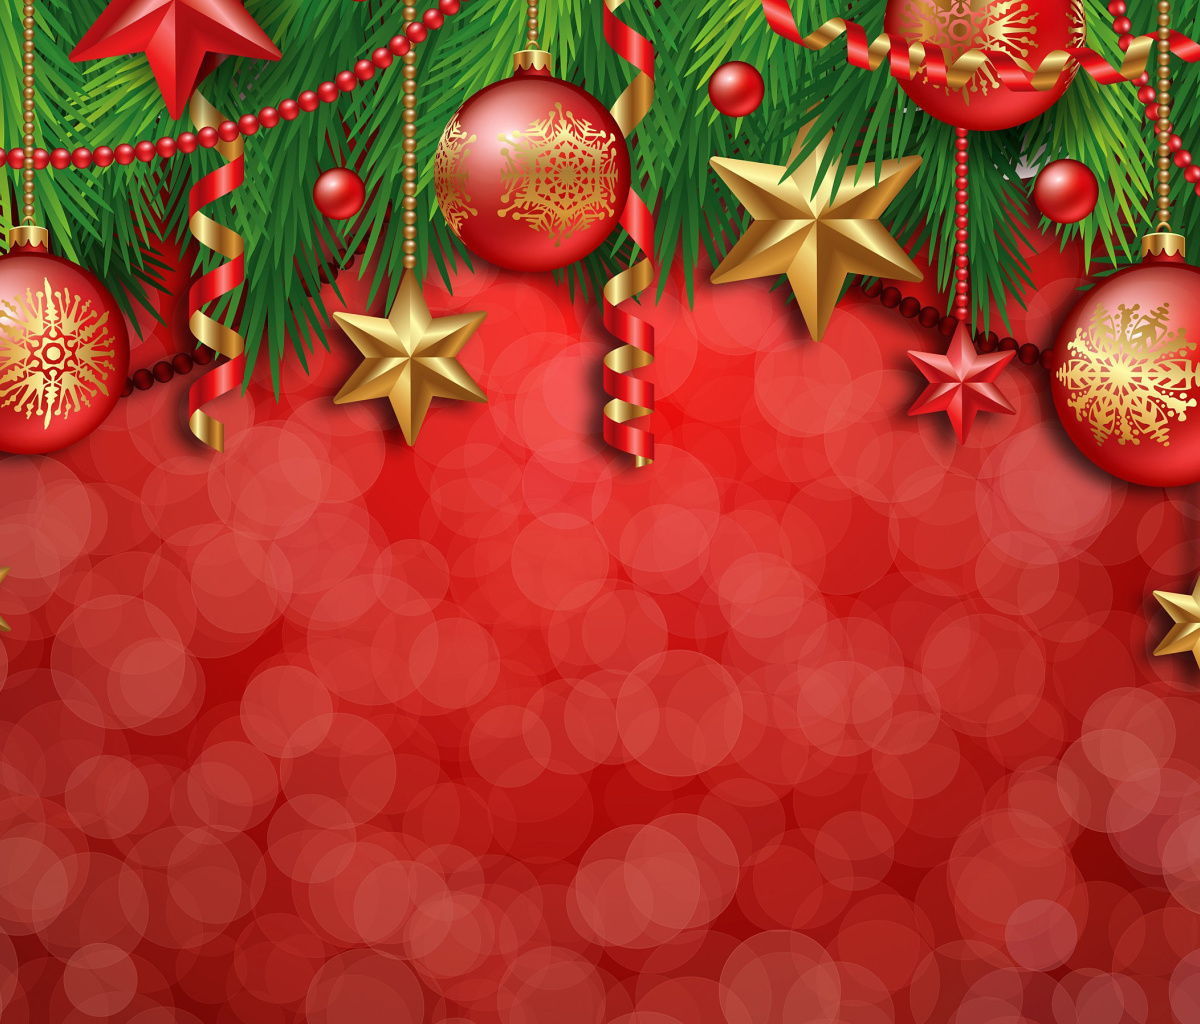 Red Christmas Decorations wallpaper 1200x1024